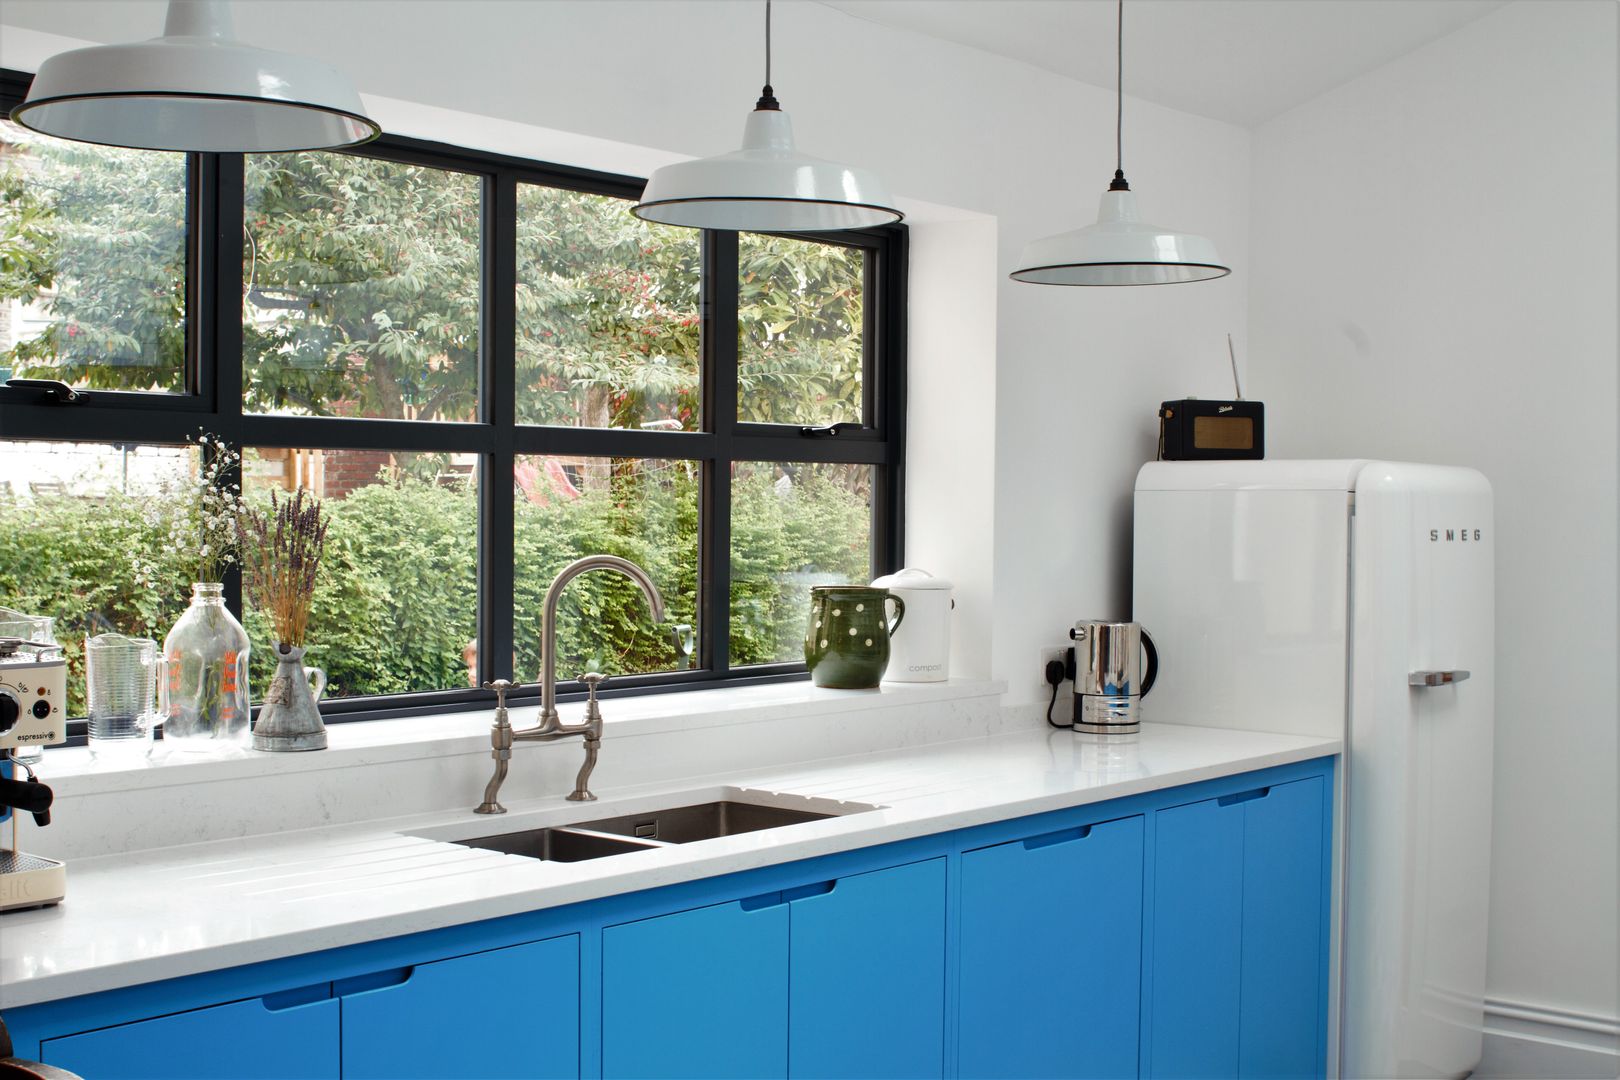 Industrial Kitchen With American Diner Feel homify Kitchen ٹھوس لکڑی Multicolored flat panel,farrow & ball,st giles blue,bianco venato,smeg fridge,monobloc tap,clearwater stereo,windows,pendant light,industrial